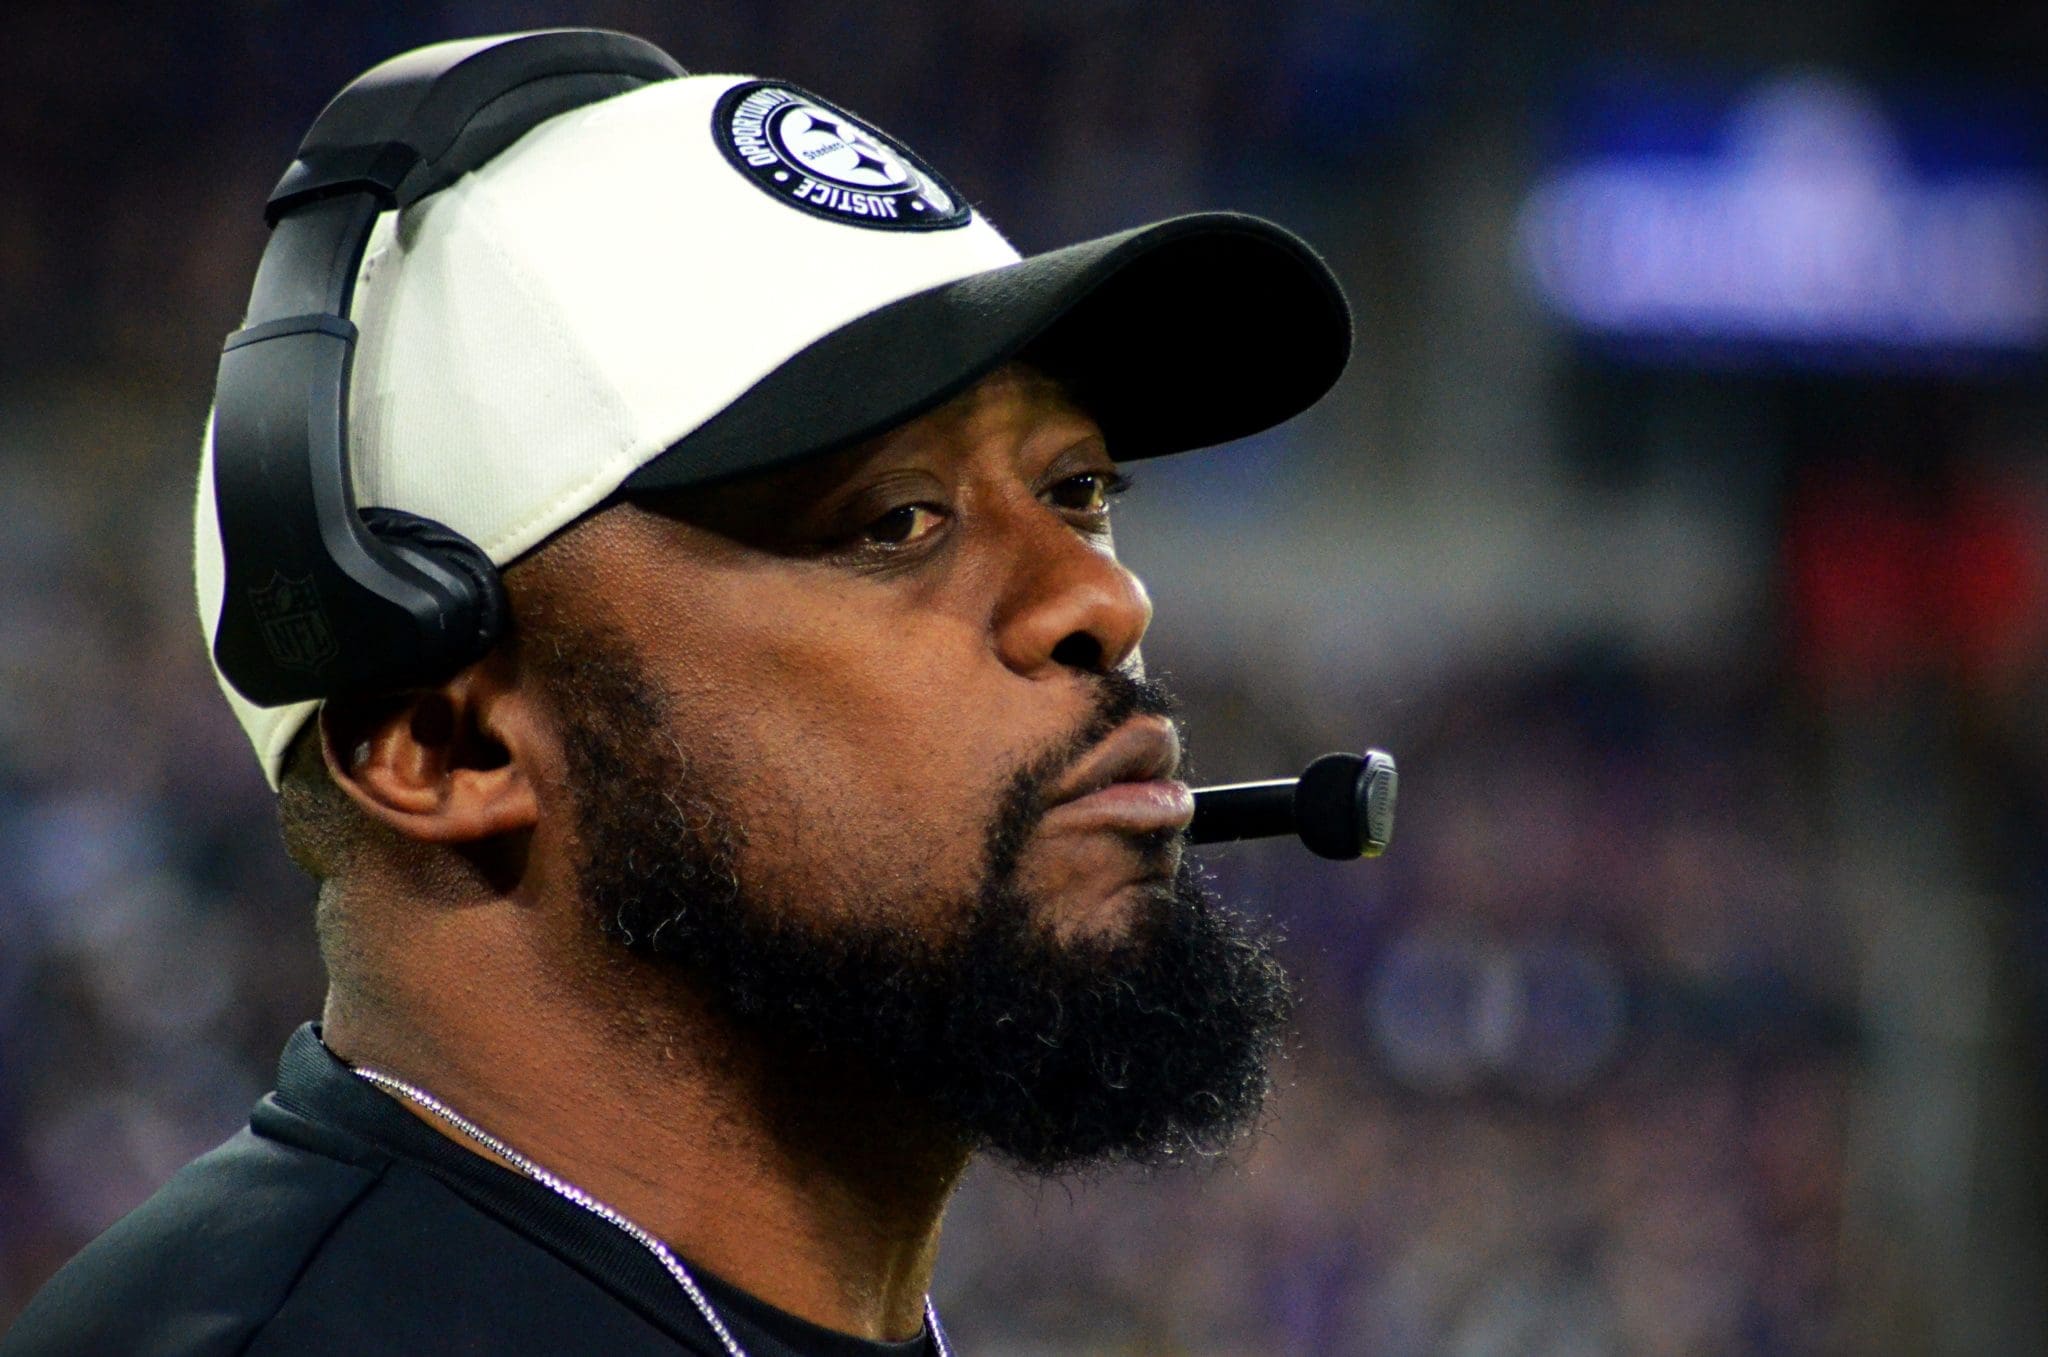 Mike Tomlin looks on as the Steelers face the Ravens on Jan. 1, 2022 in Baltimore. (Mitchell Northam / Steelers Now)